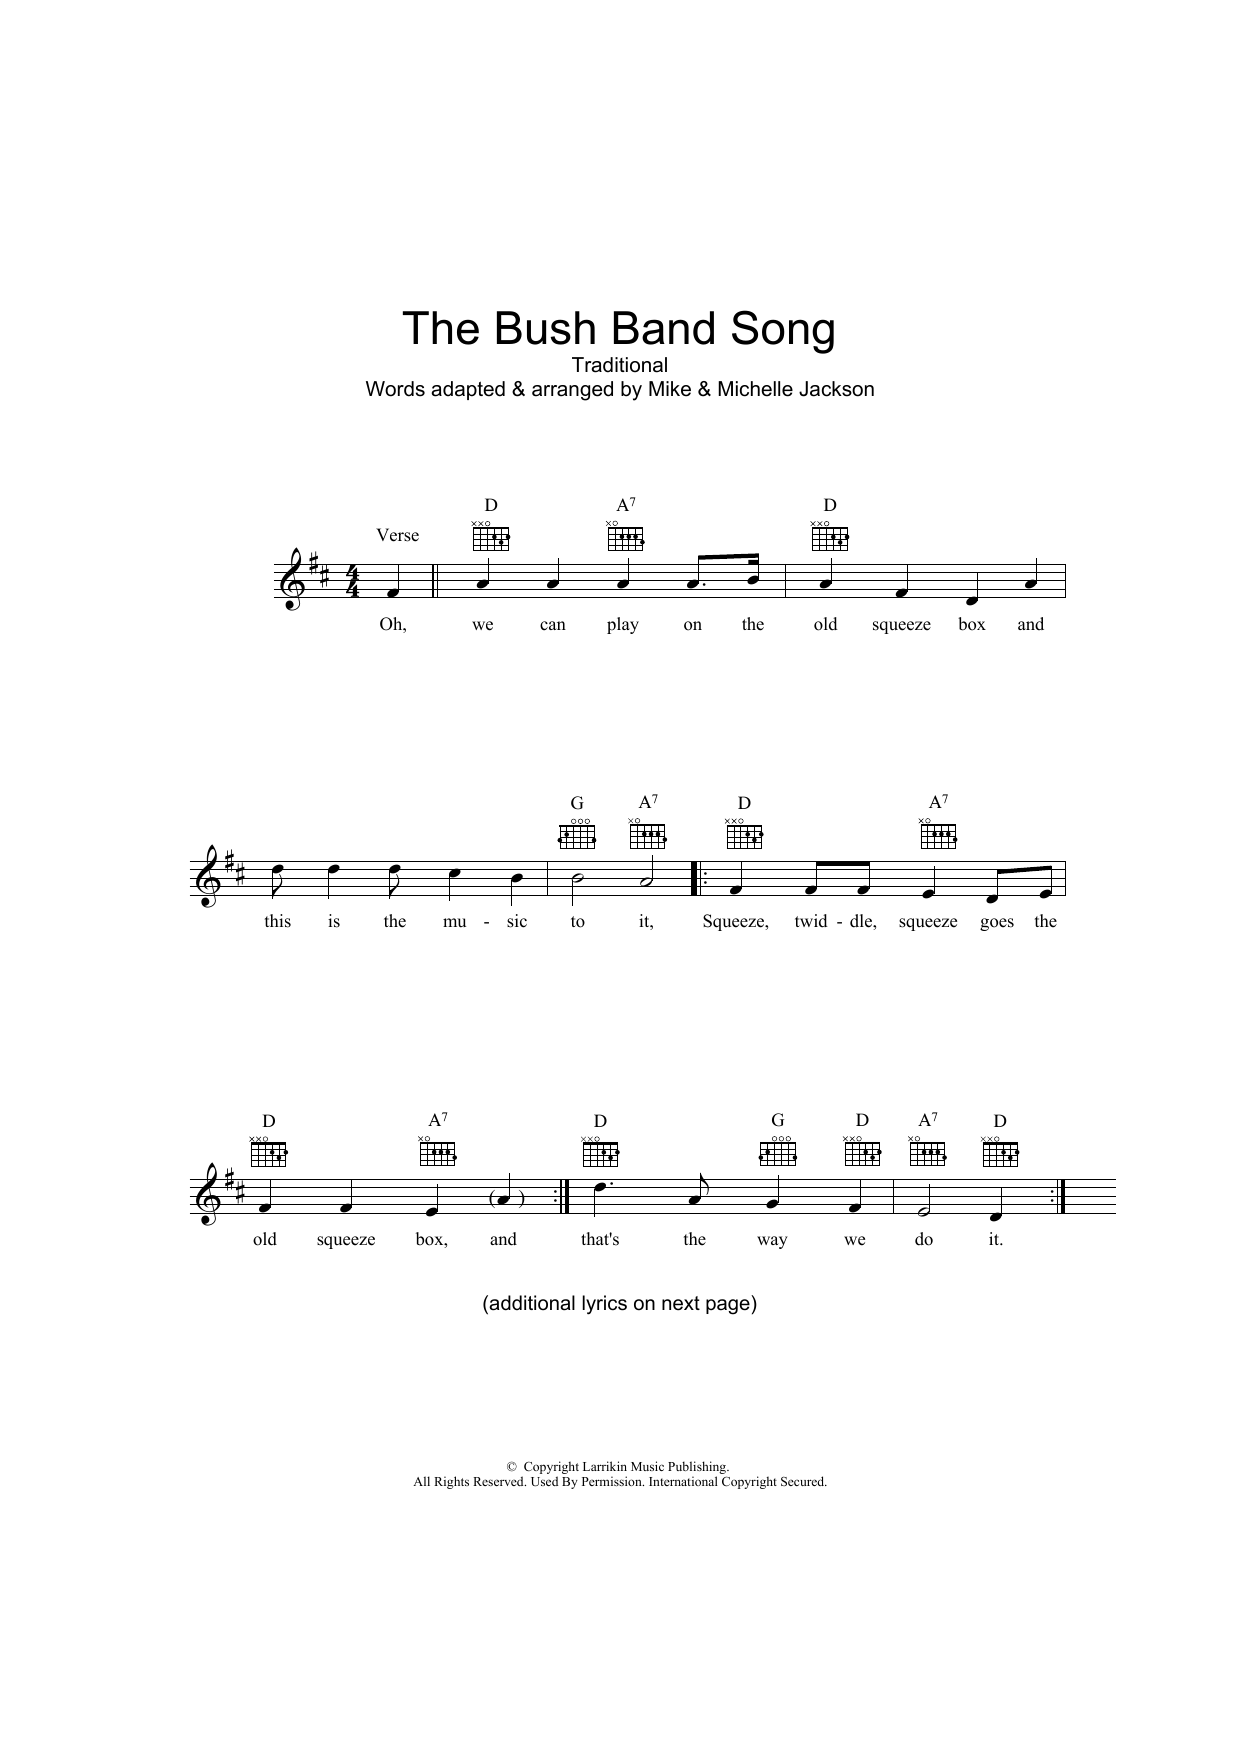 Download Traditional The Bush Band Song Sheet Music